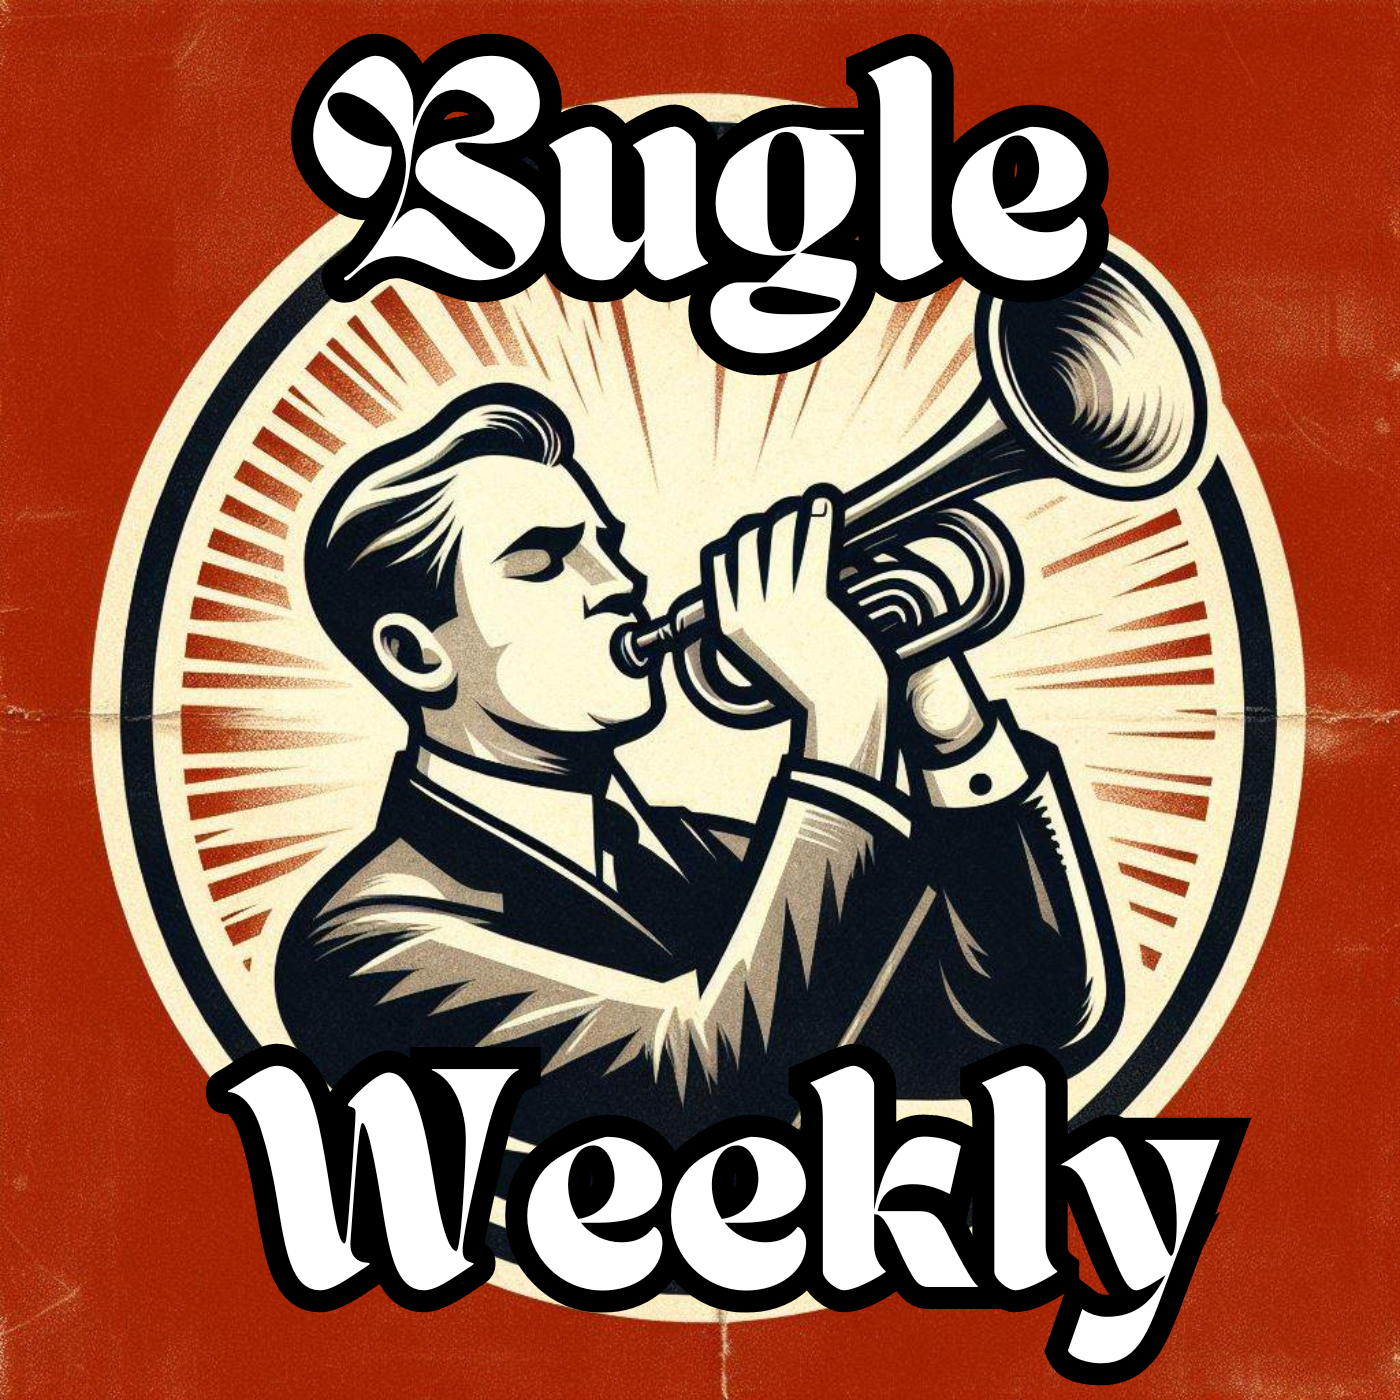 Out Complying The Competition | Bugle Weekly Episode 1